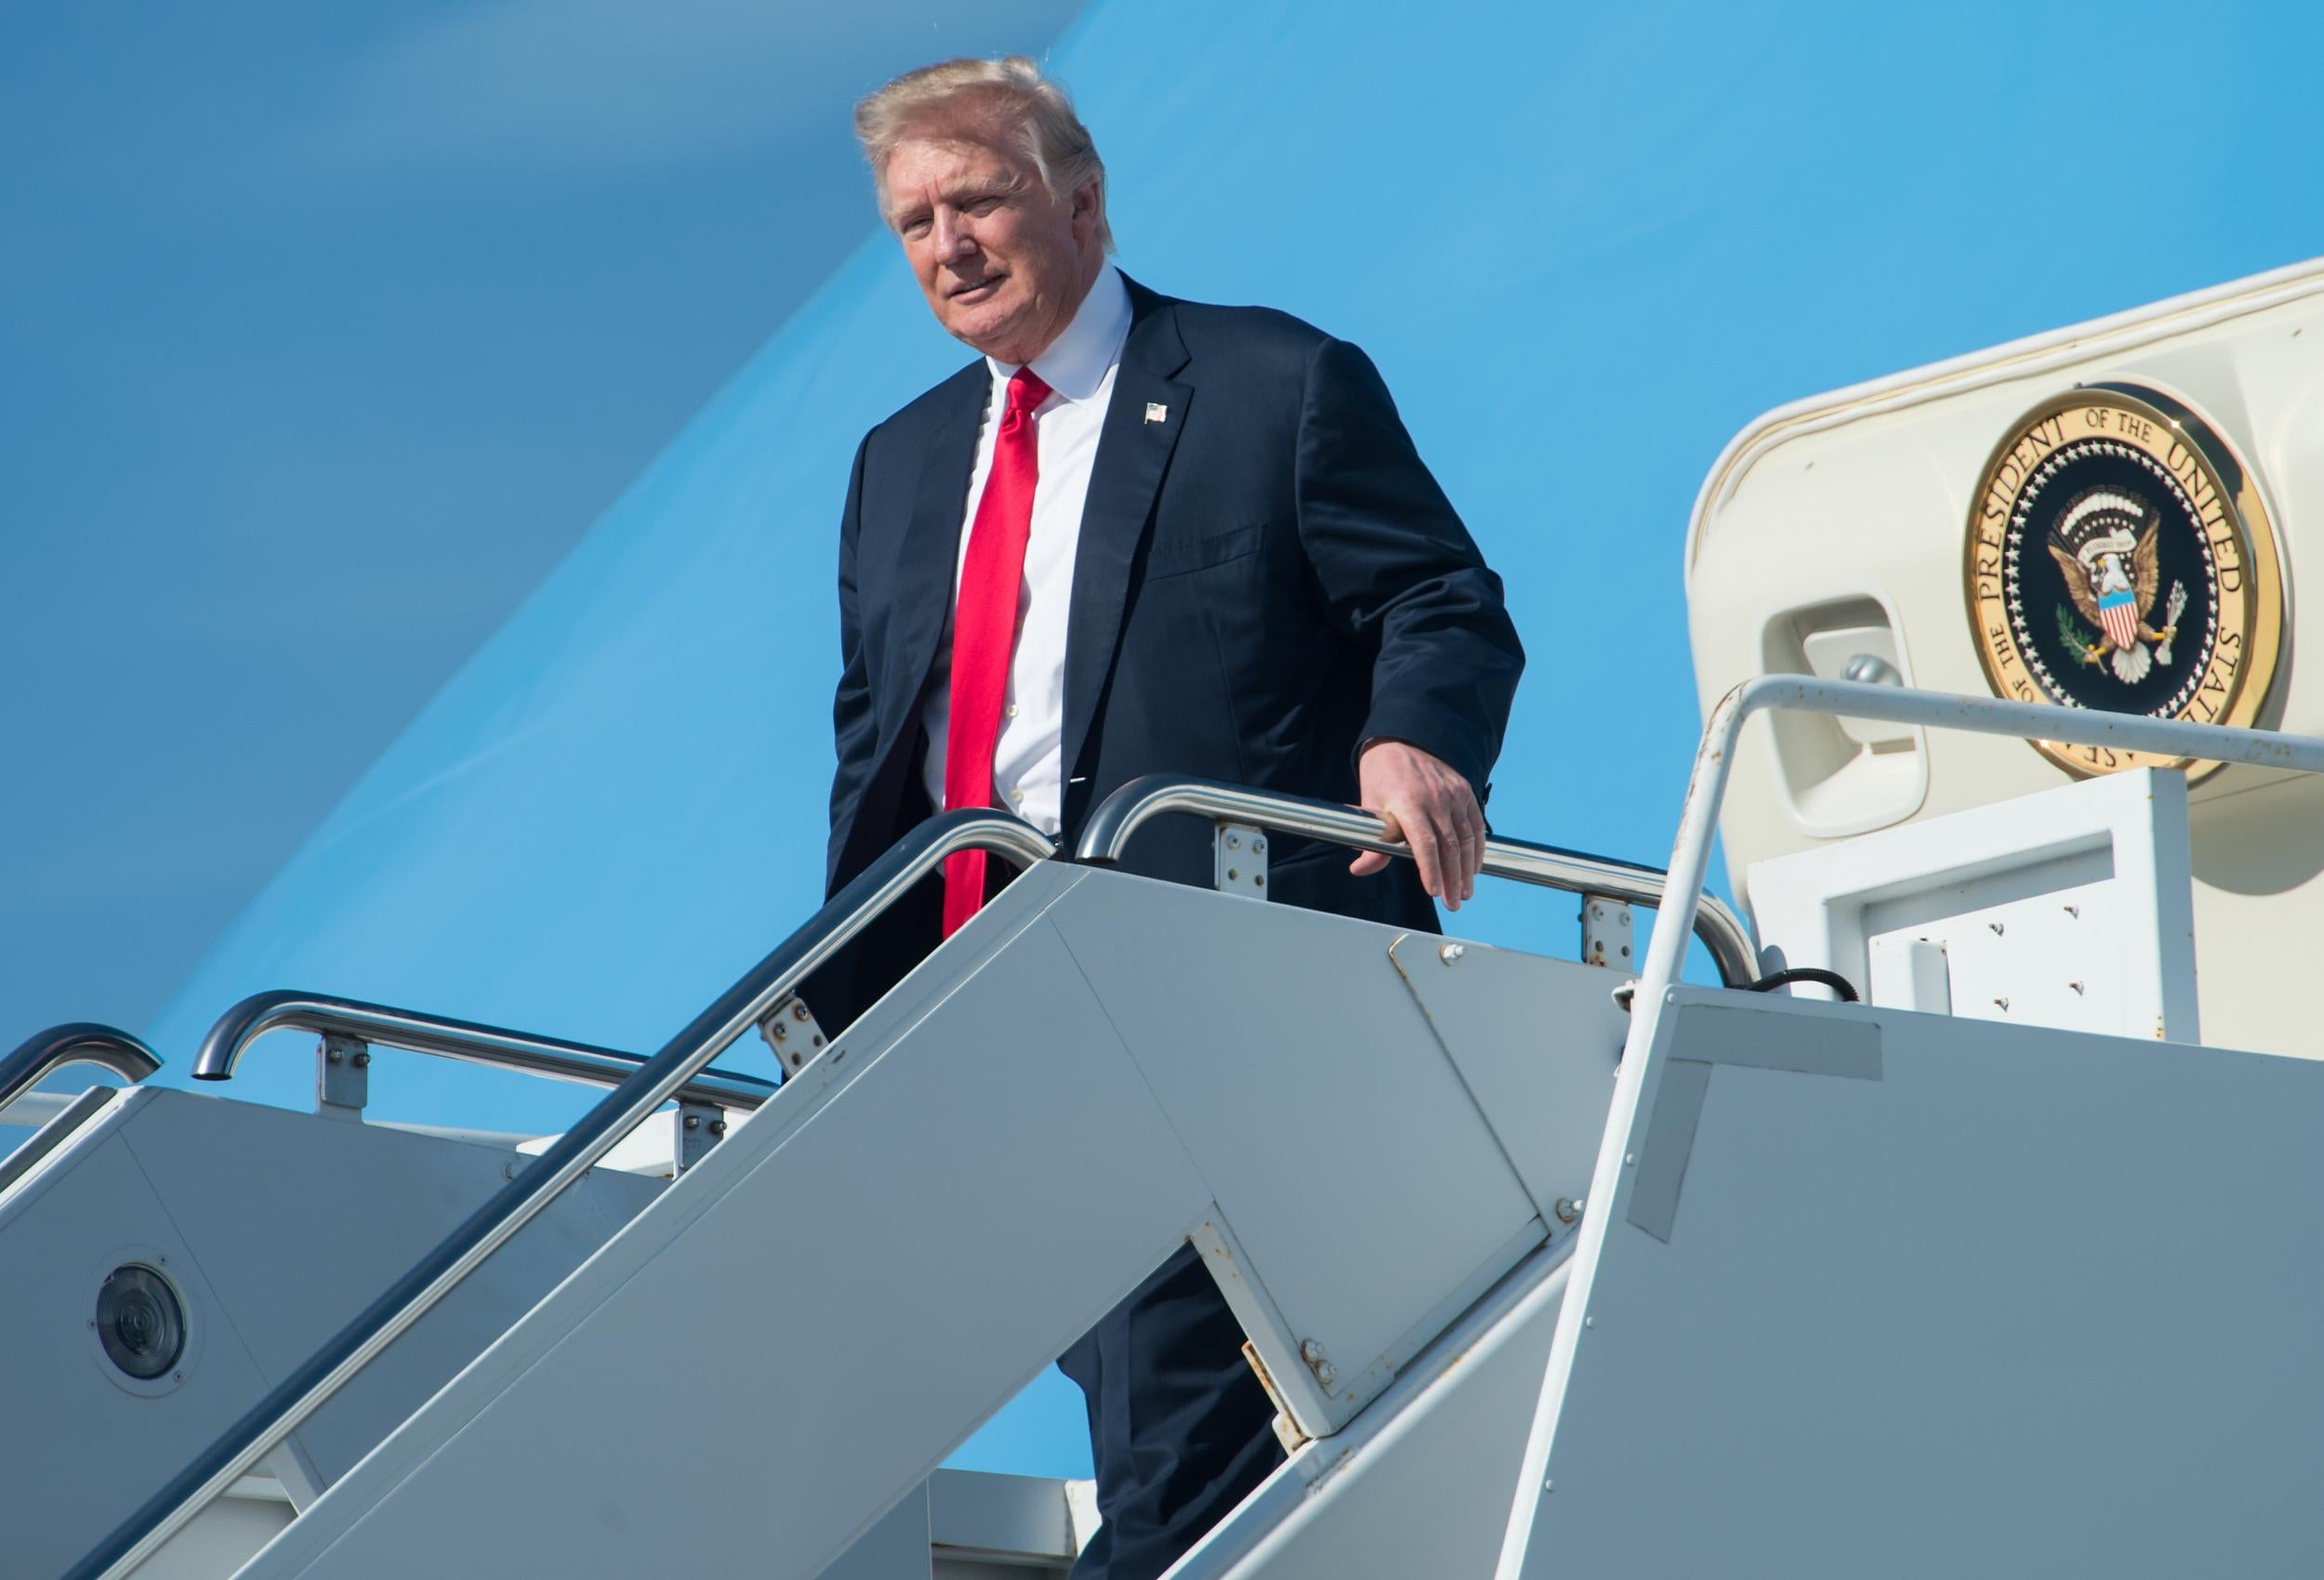 President Trump is estimated to have spent $24m on travel expenses in his first 10 weeks